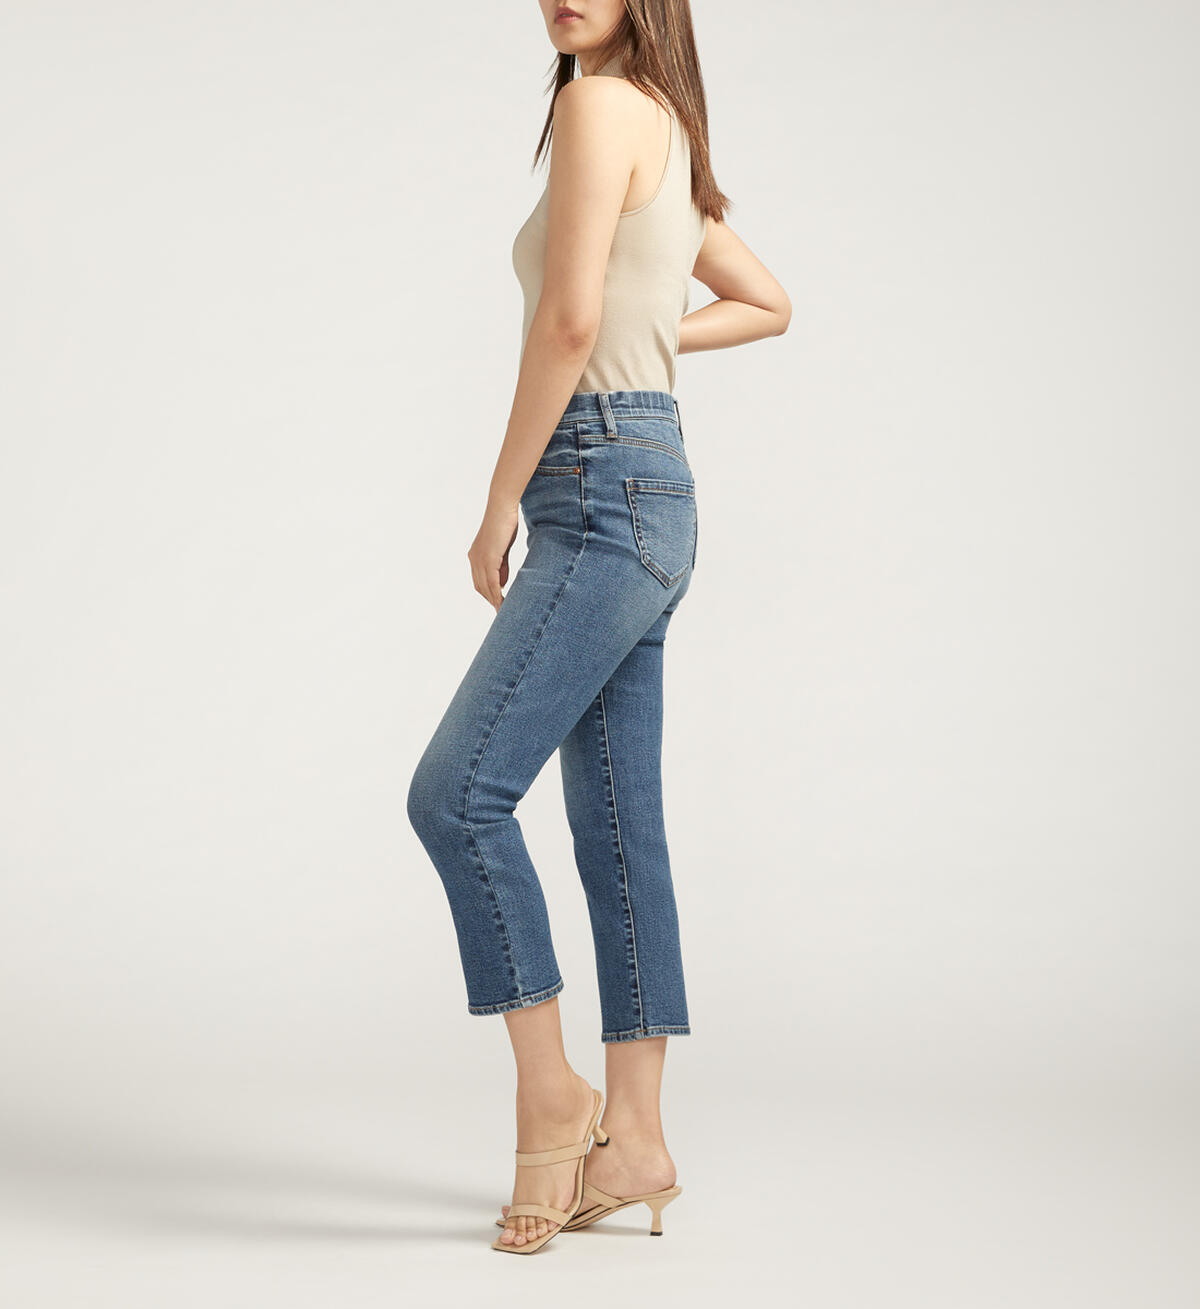 Valentina High Rise Straight Leg Cropped Jeans, , hi-res image number 2